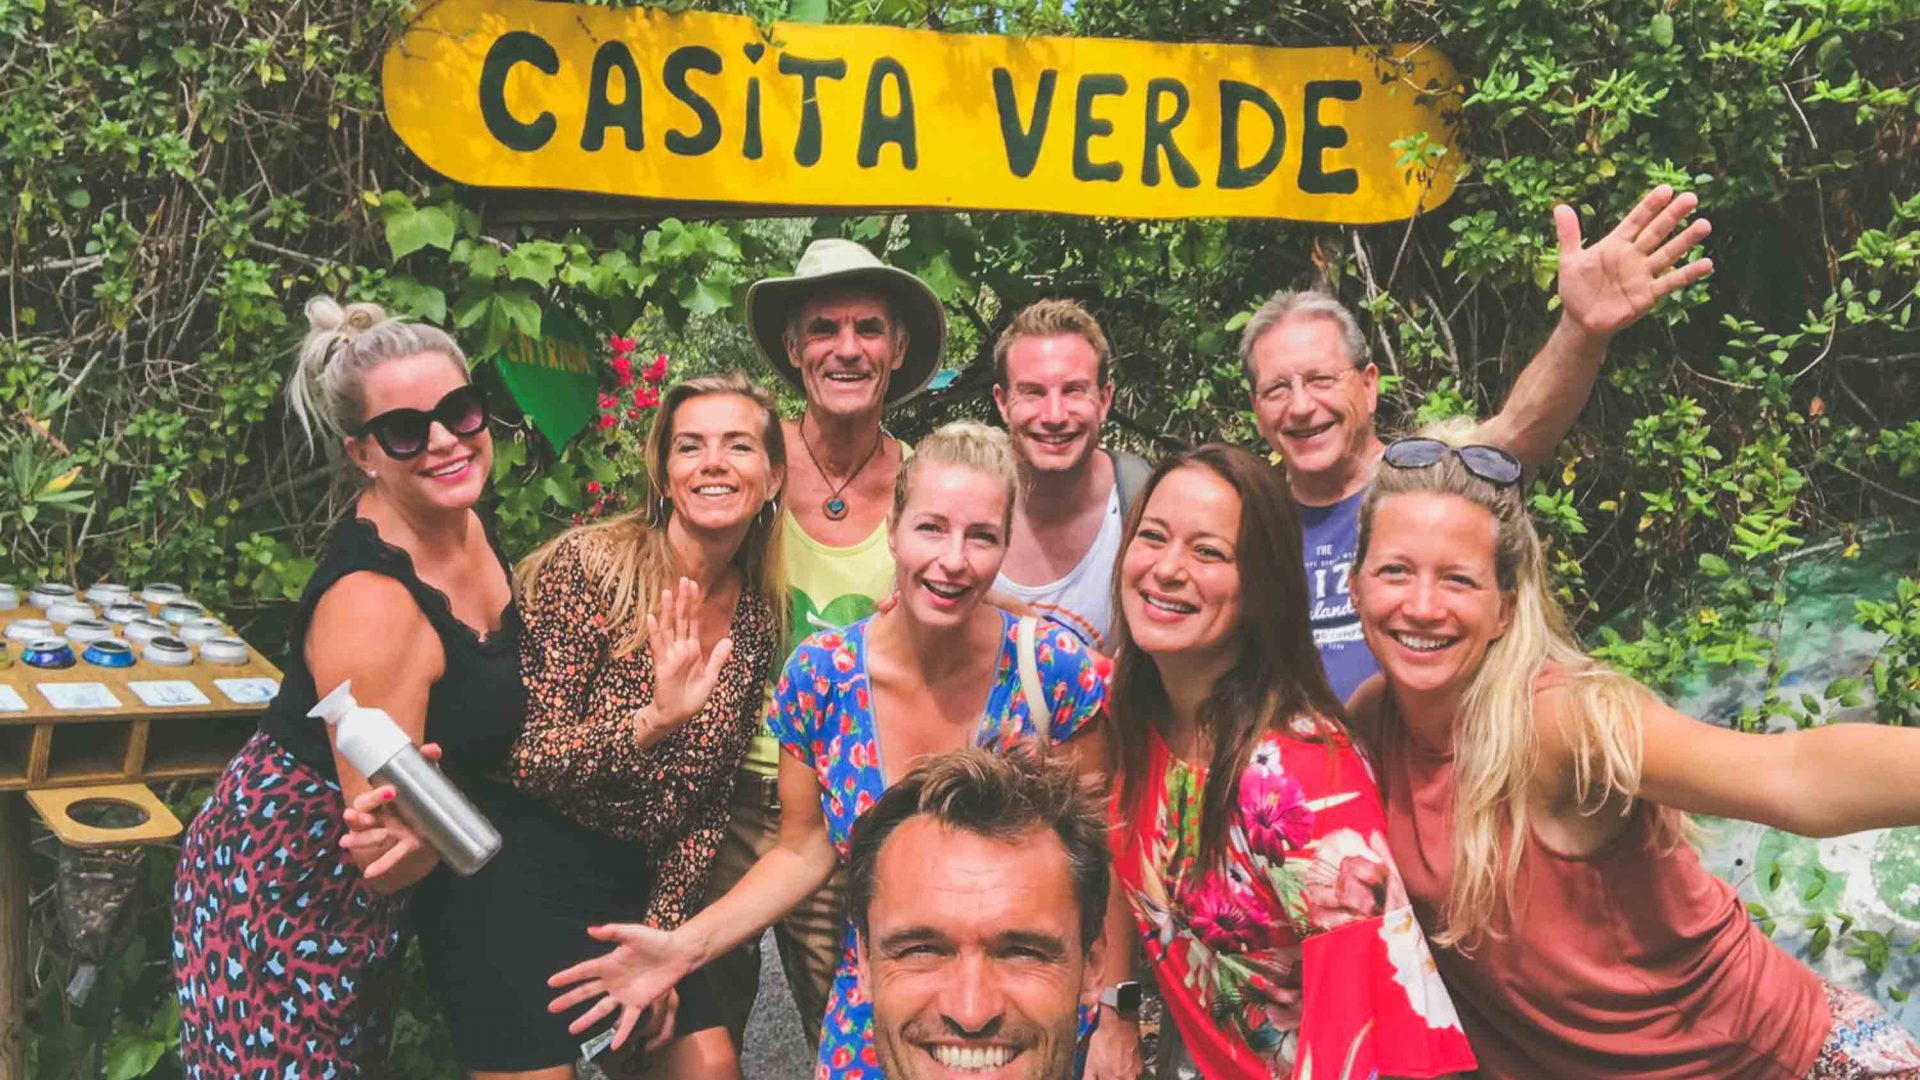 Volunteers at Casita Verde in Ibiza. Chris Dews, coordinator of the Green Heart Movement stands in the back row, wearing a hat.